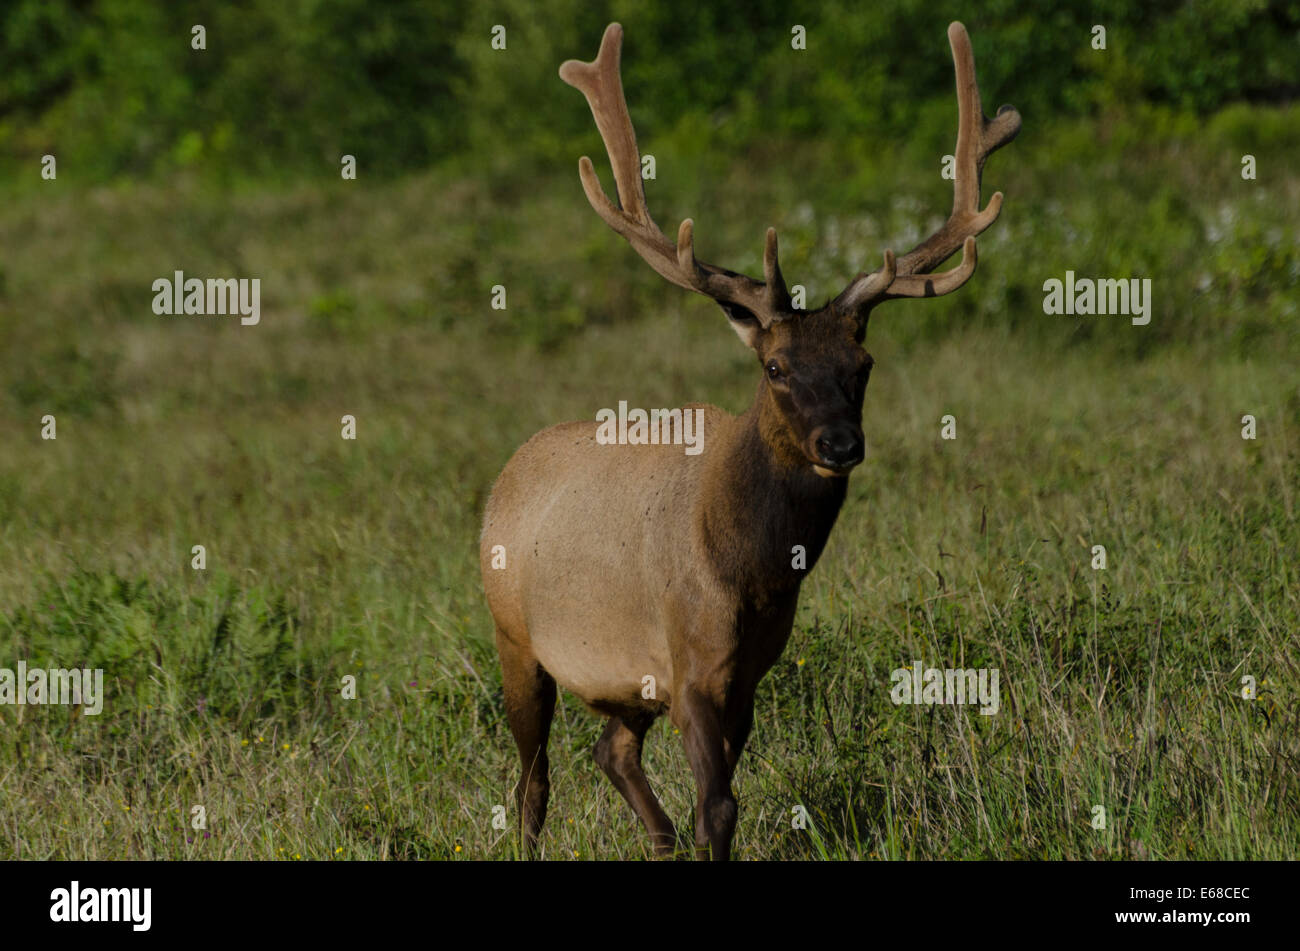 Roosevelt Elk Bulls (Cervus canadensis roosevelti) with antlers in the velvet that will nourish their growth until shed in the f Stock Photo